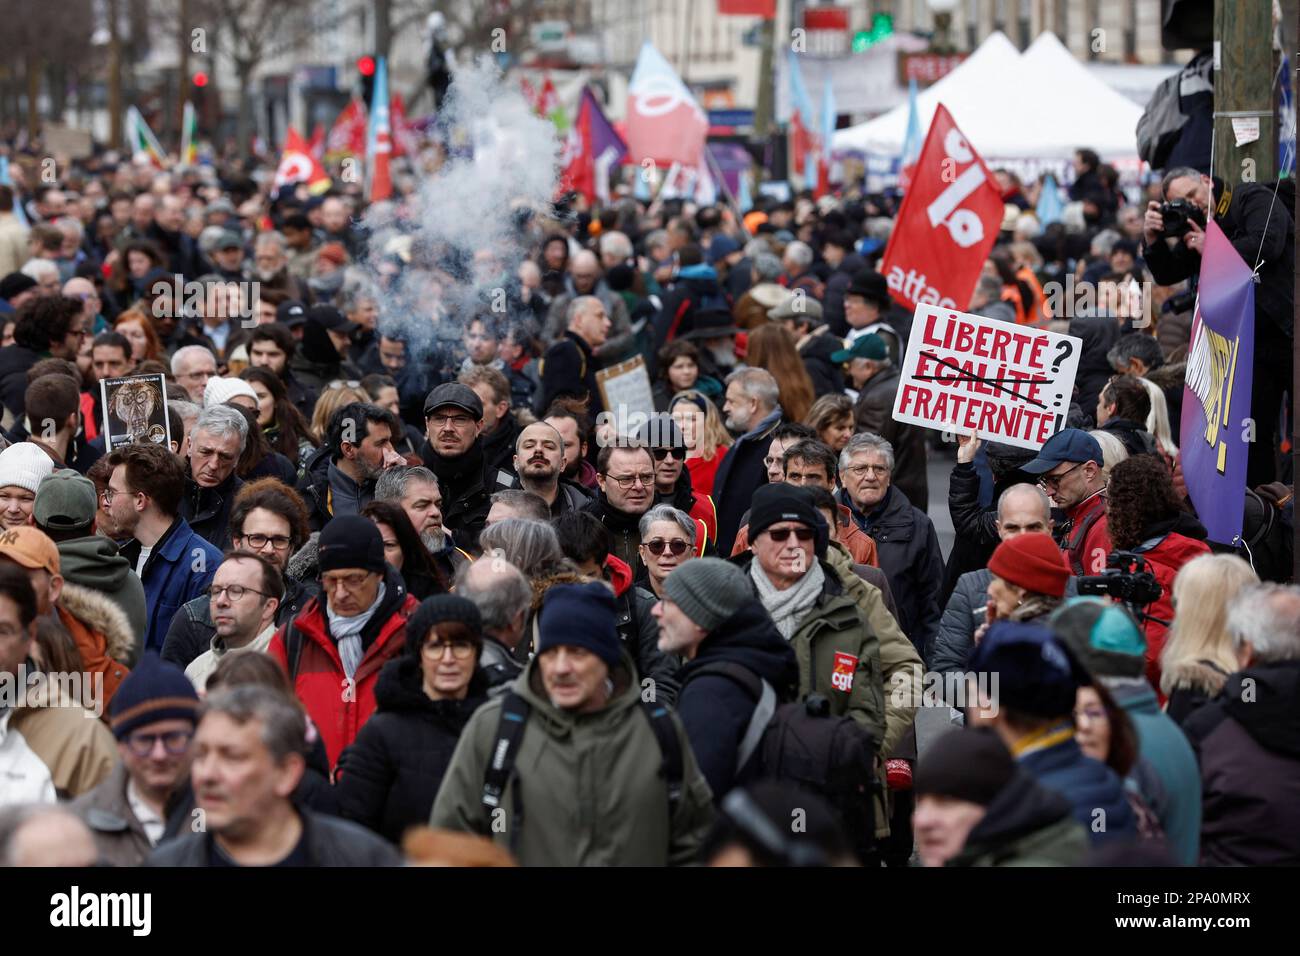 Demonstrators march against the government's pension reform plan in Paris, France, March 11, 2023. REUTERS/Benoit Tessier Stock Photo